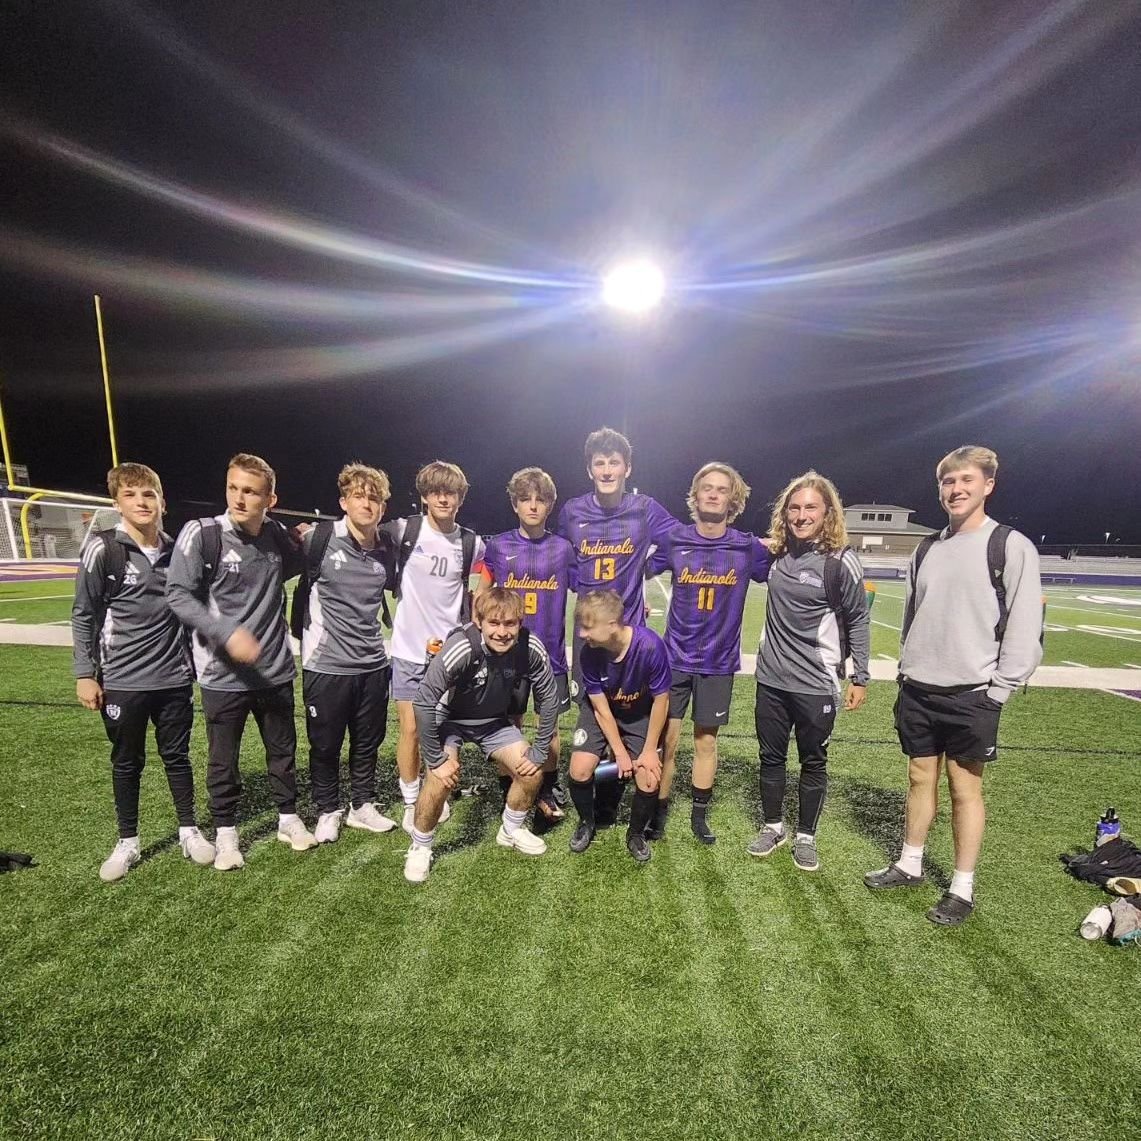 These Apex players competed against each other  in an OT thriller - Indianola vs. Norwalk last night! Good luck the rest of the season! @norwalkboyssoccer #apexfamily